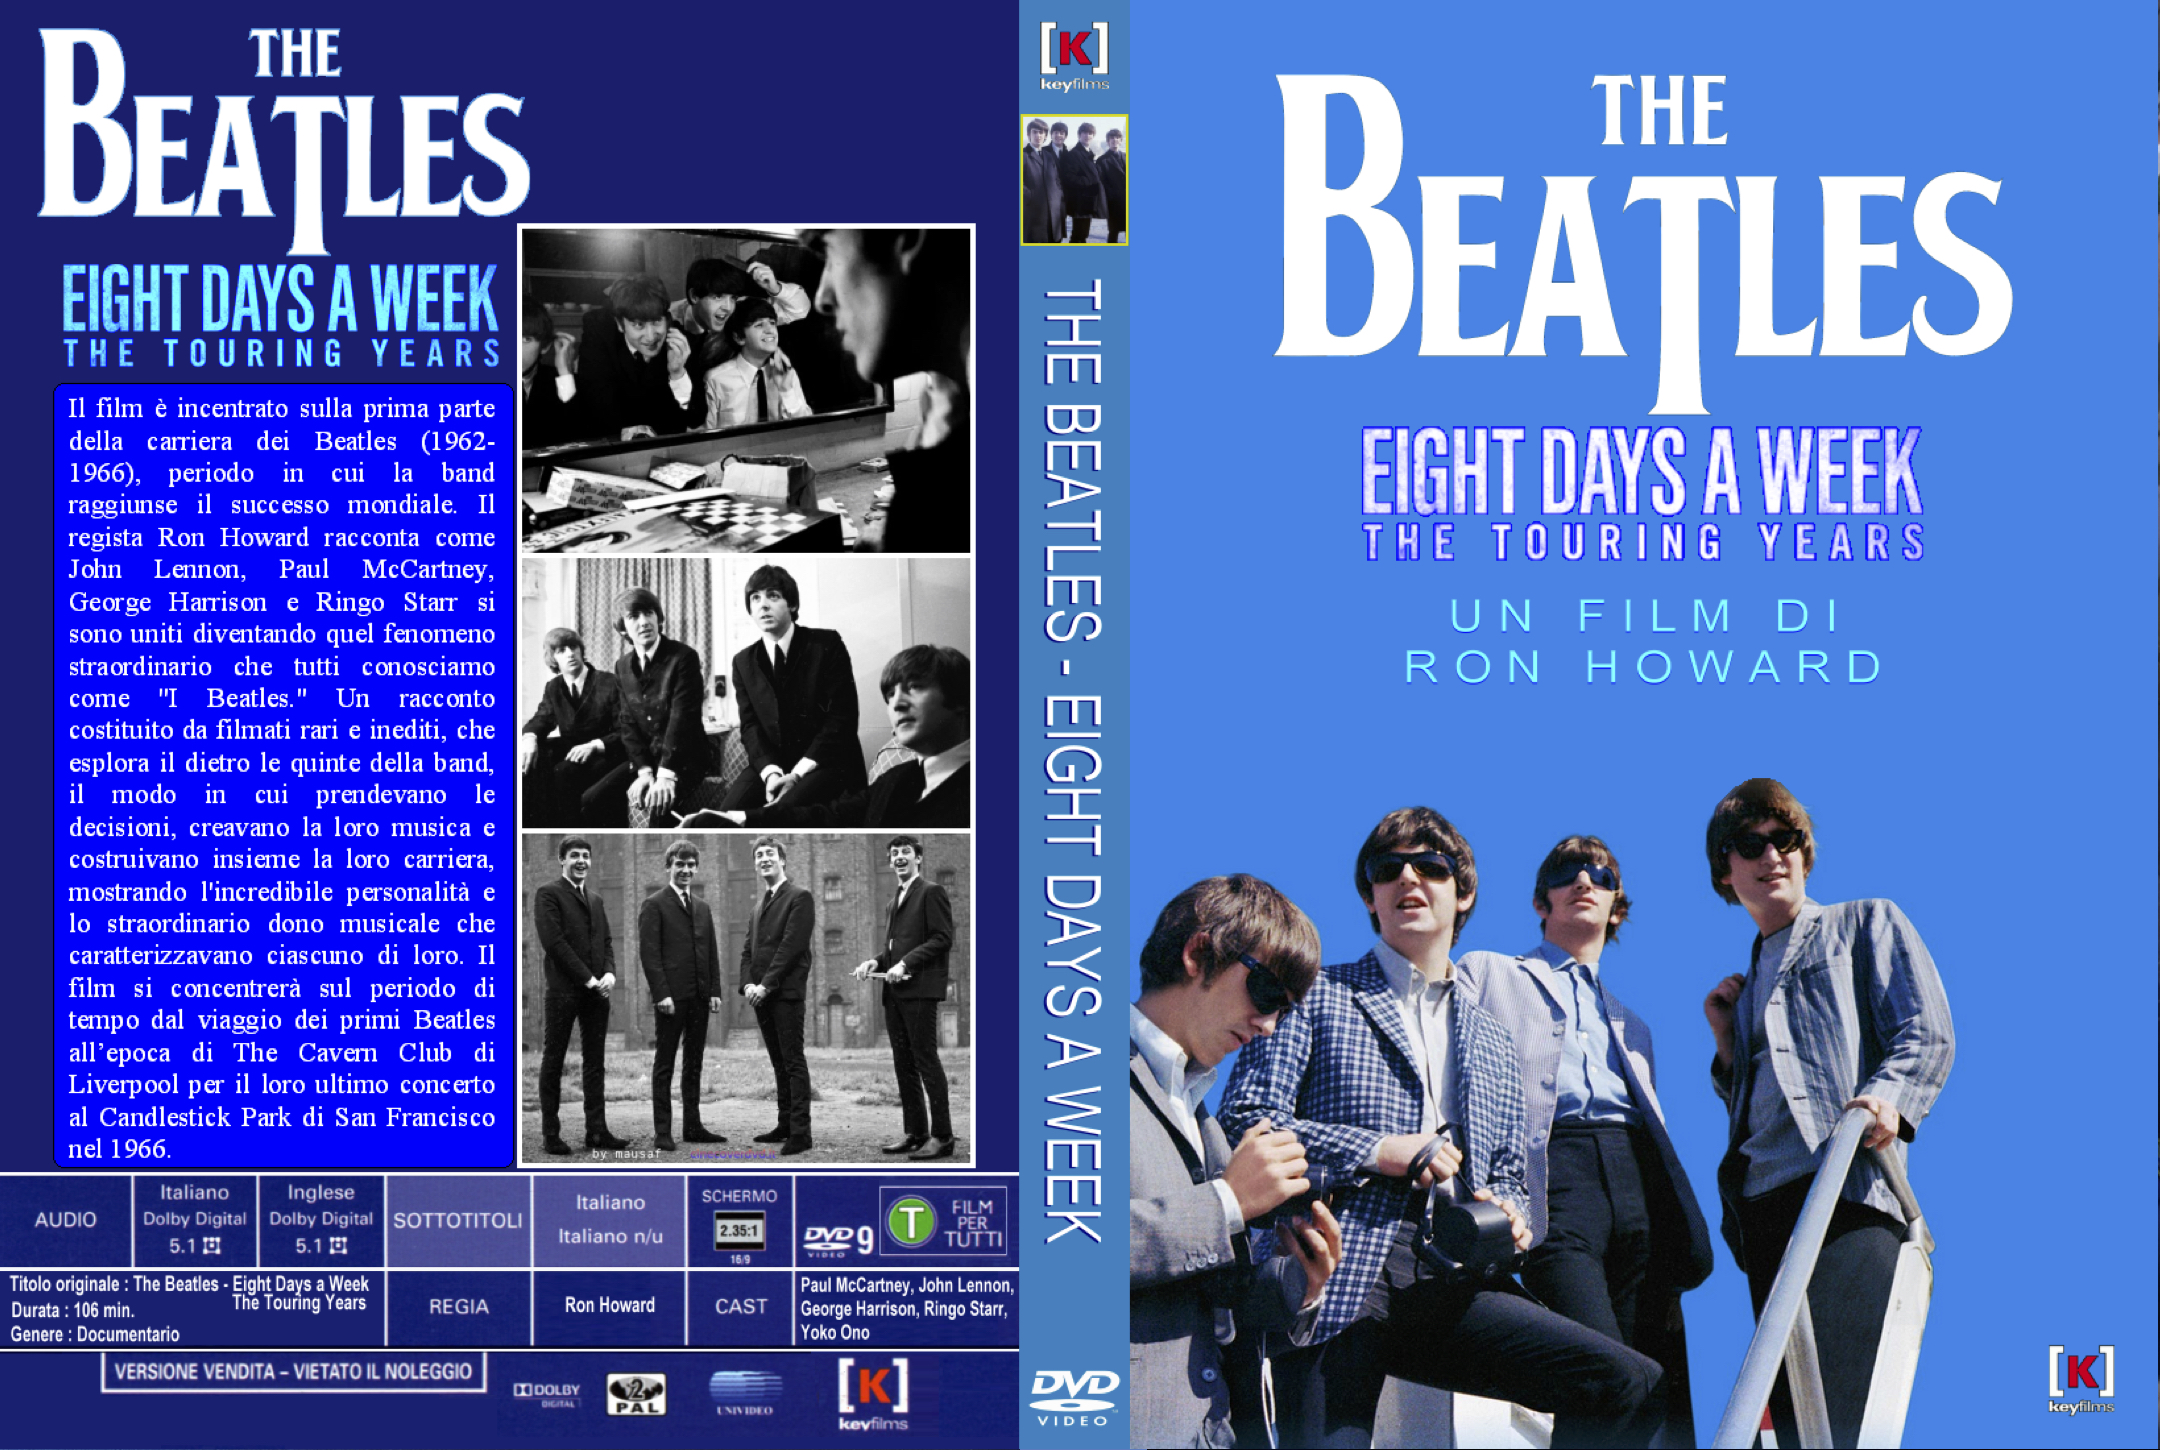 Covers Box Sk The Beatles Eight Days A Week 16 Cover Custom High Quality Dvd Blueray Movie